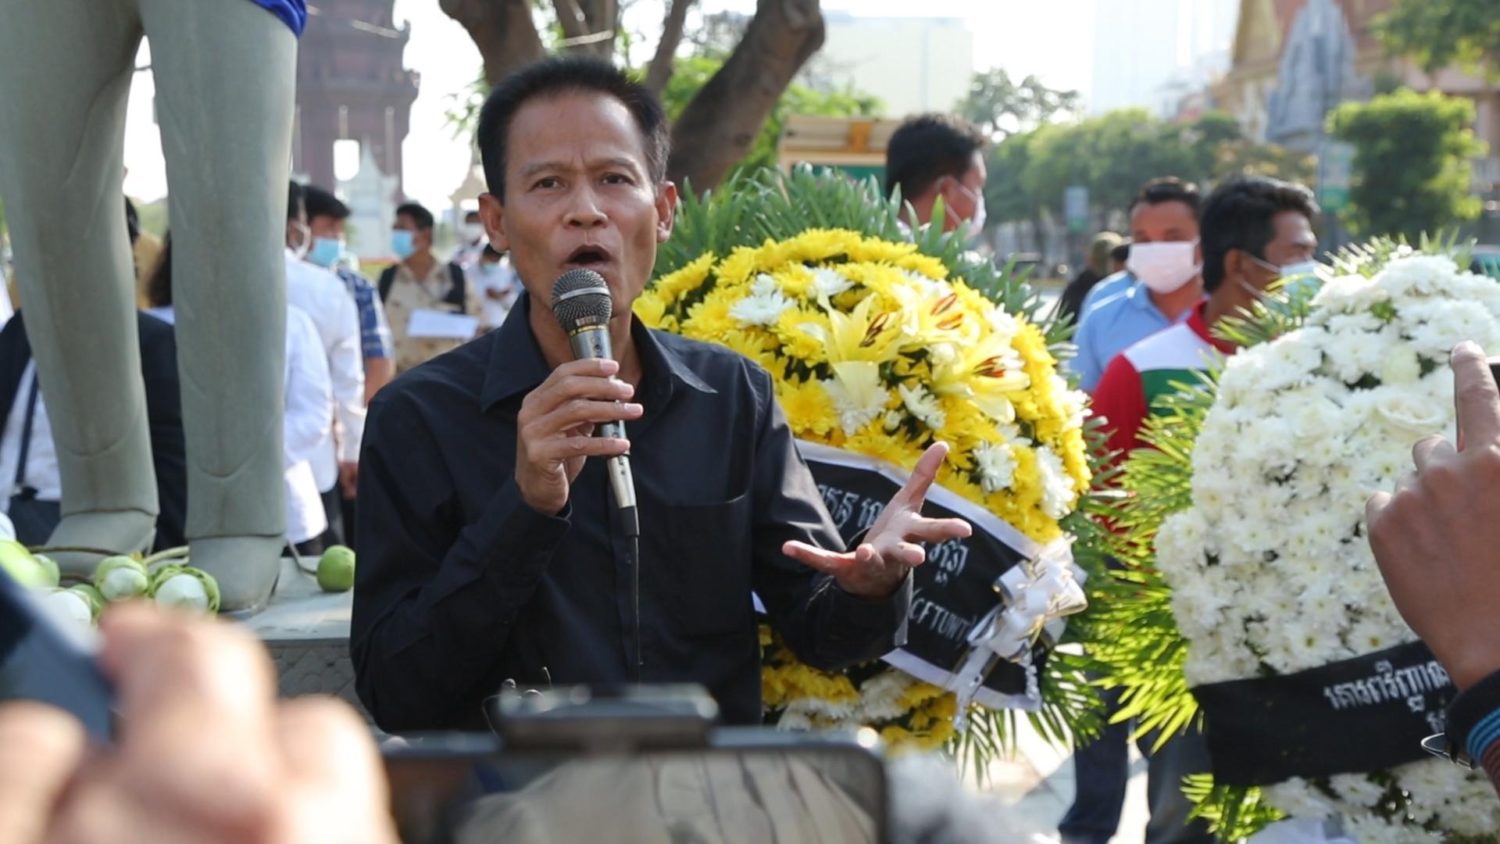 Chea Mony speaks at the 18th anniversary of the shooting of his brother Chea Vichea, in Phnom Penh on January 23, 2022. (Huy Ousa/VOD)